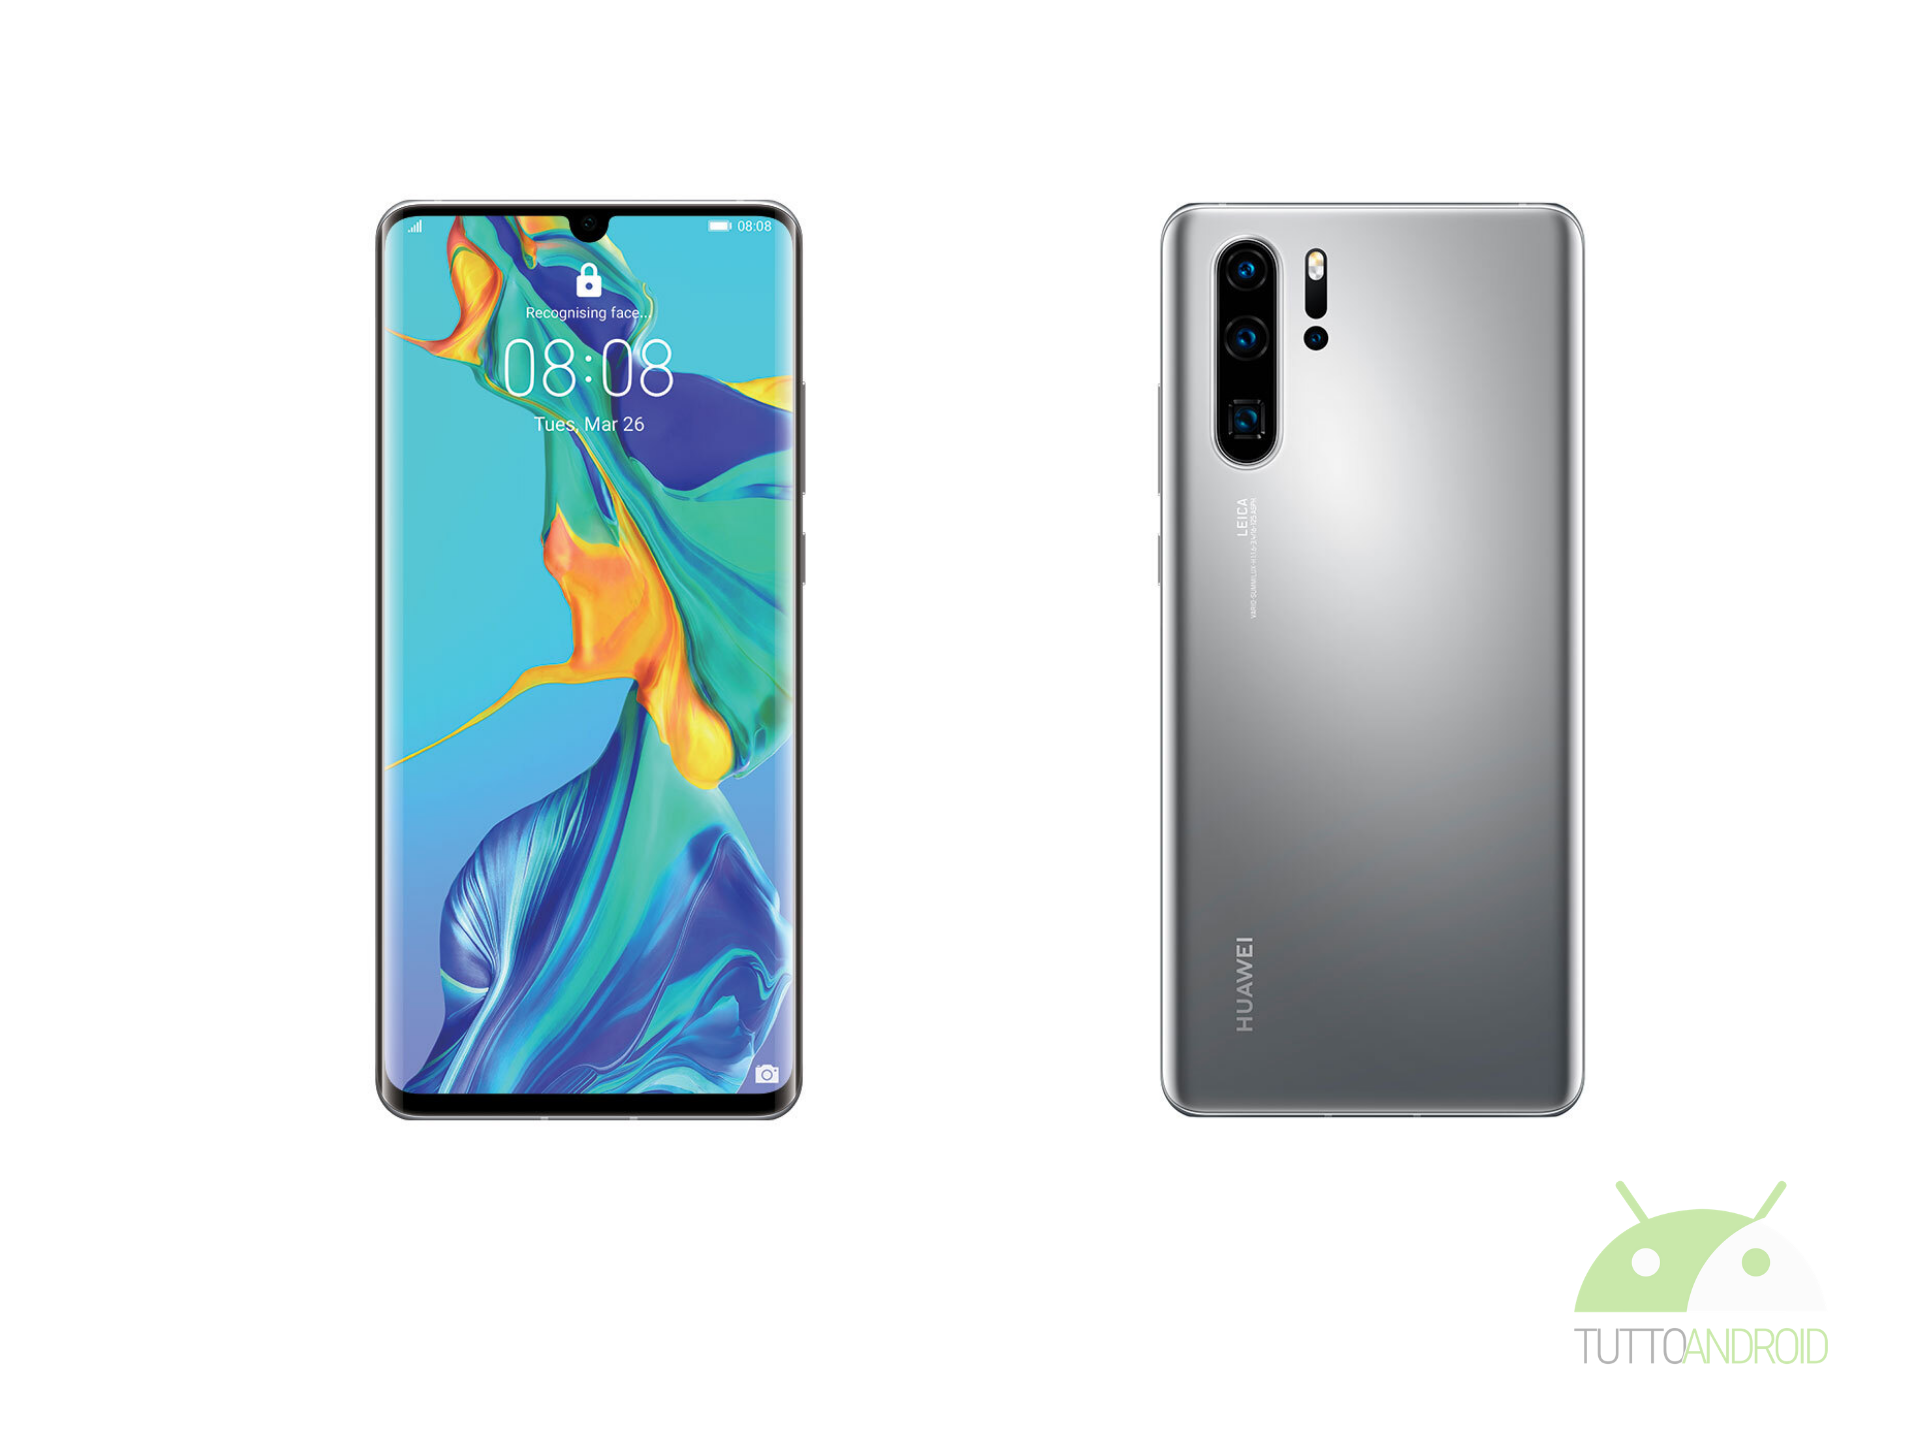 Huawei p30 Pro New Edition. Huawei p30 new edition